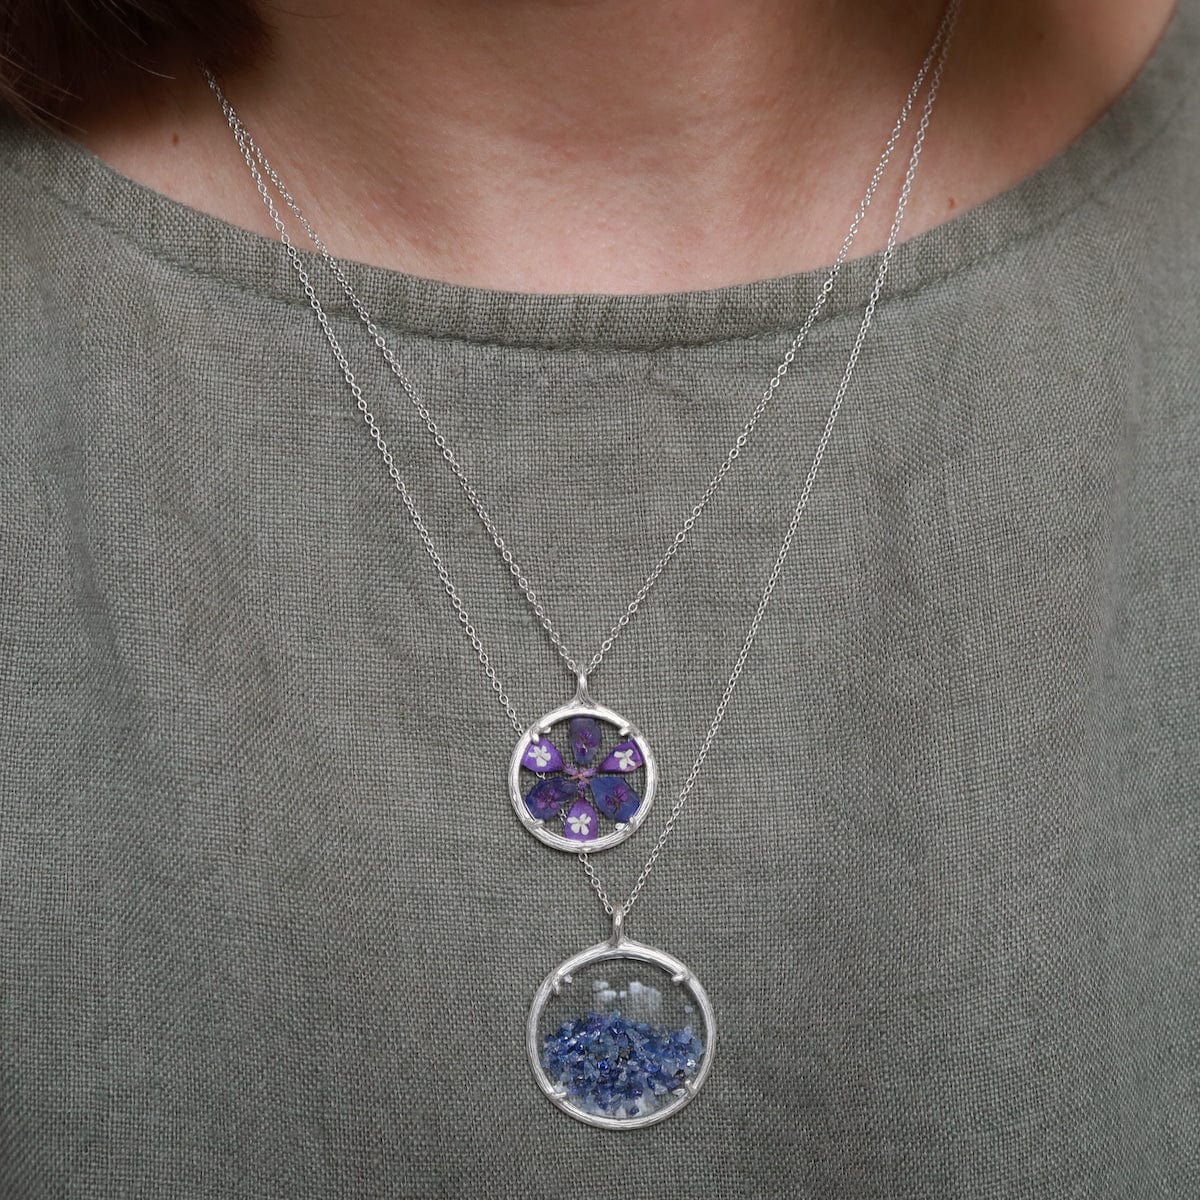 NKL Large Shaker Birthstone Necklace - Silver / Sapphire